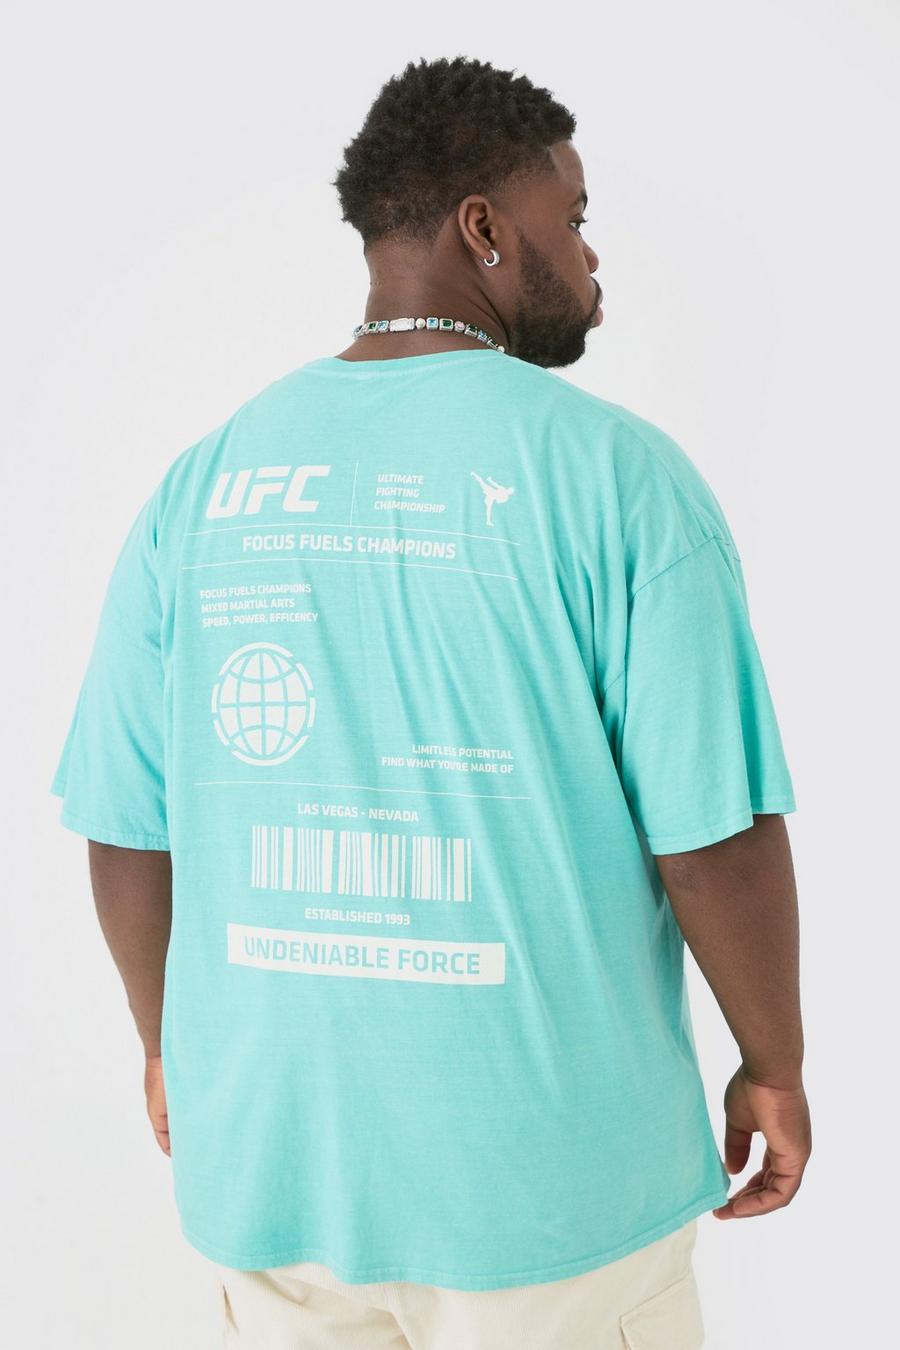 Plus UFC Printed Licensed T-shirt In Green